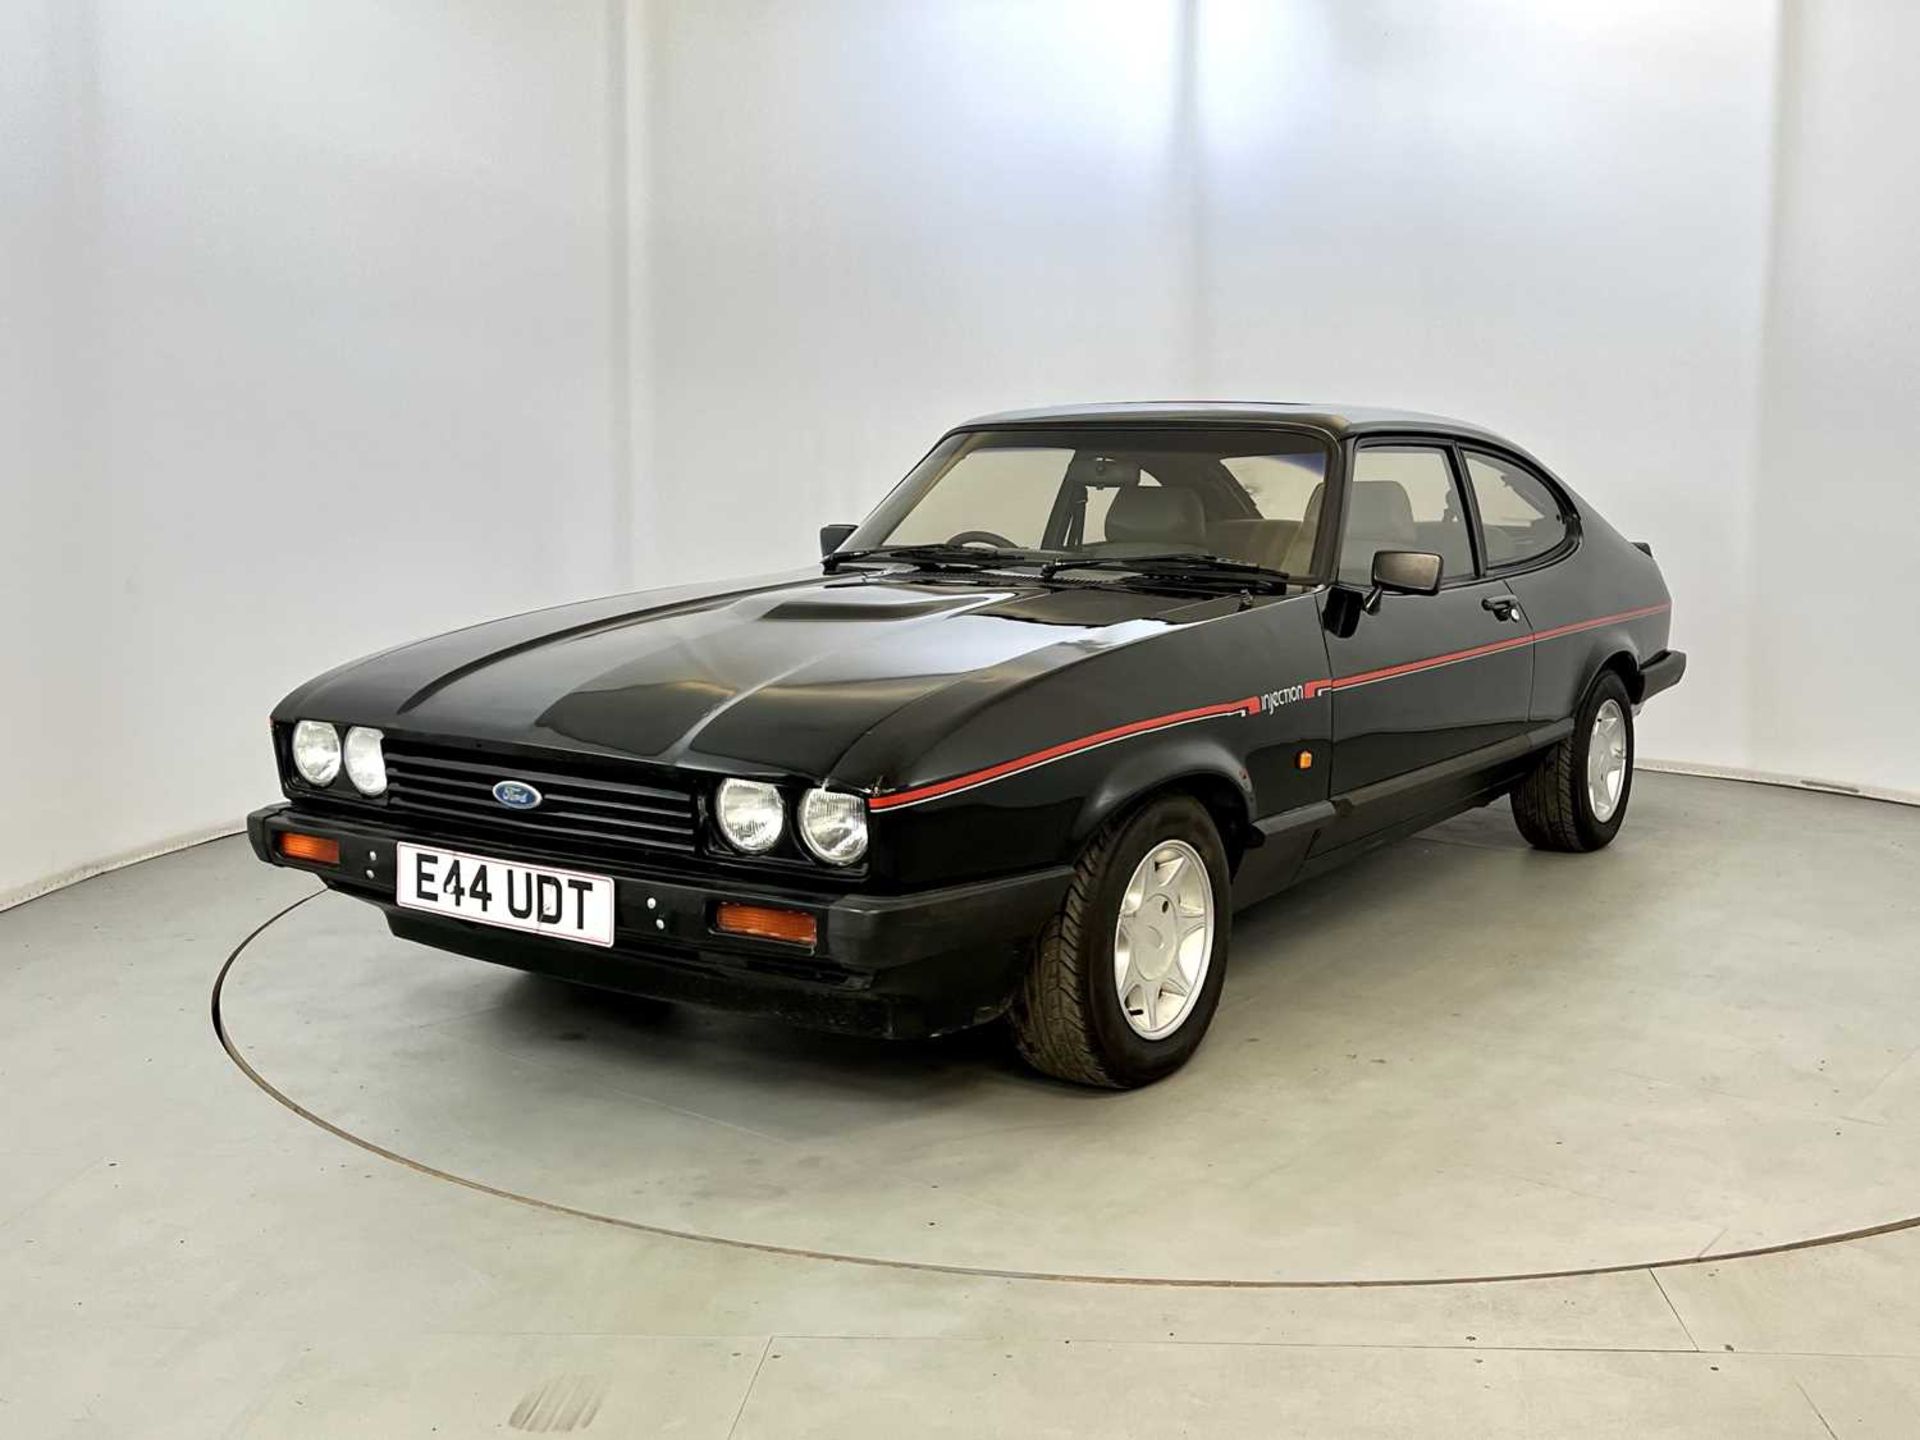 1987 Ford Capri 2.8 Injection - Image 3 of 28